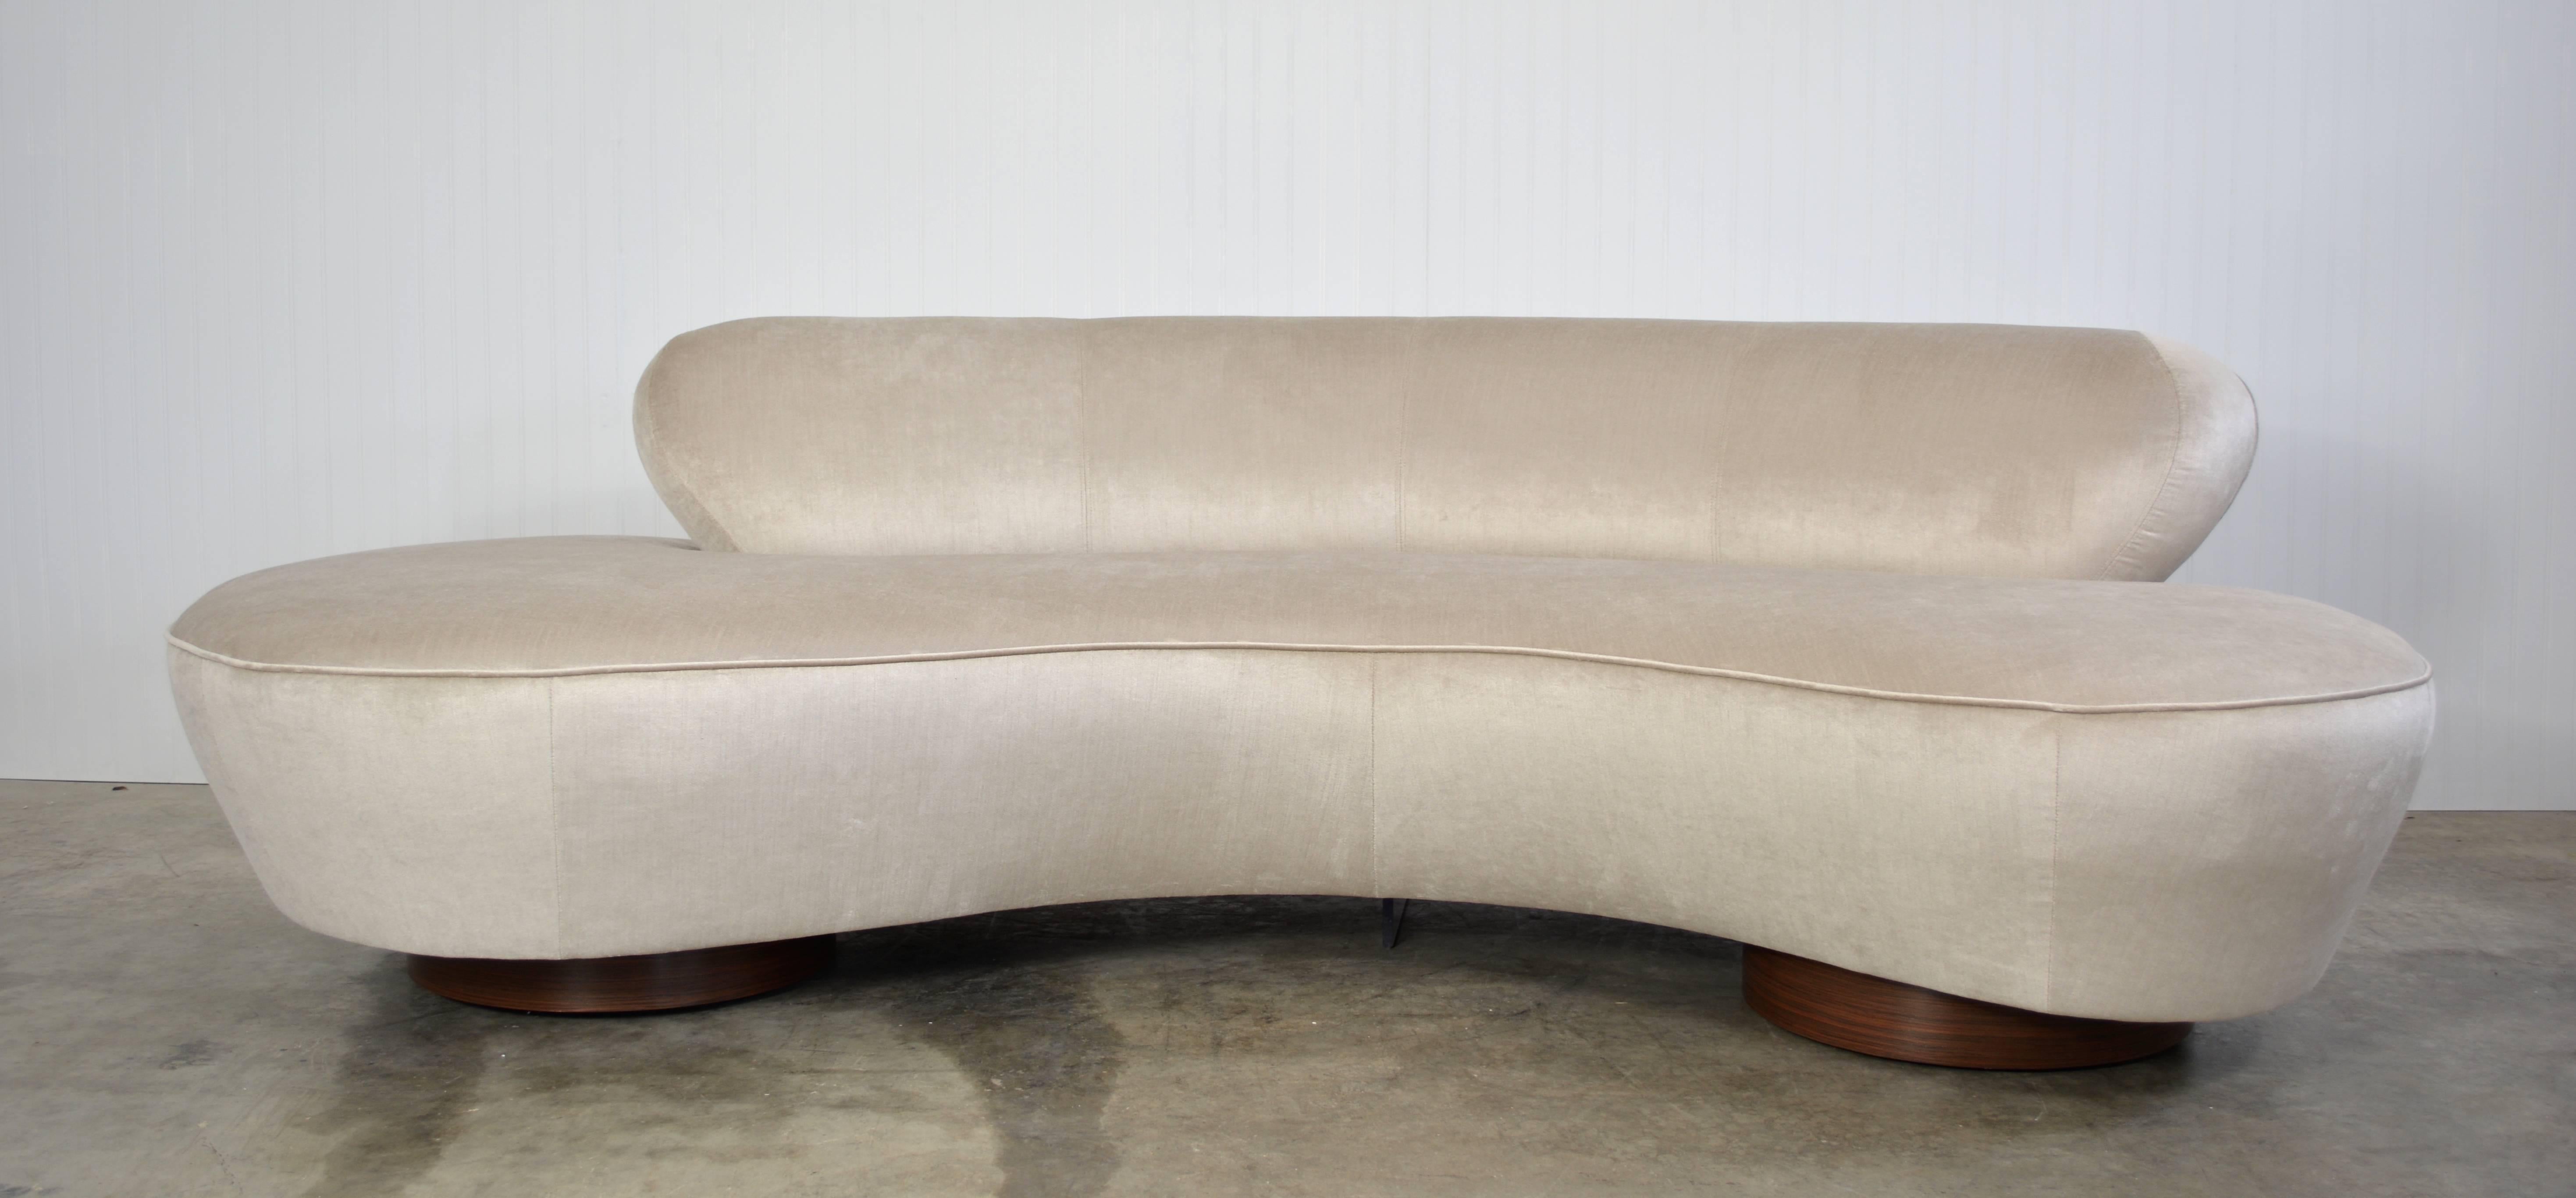 A pair of mirror image Serpentine sofas designed by Vladimir Kagan for Directional. Both are newly recovered in a linen blend velvet over rosewood bases. Both retain their original Directional labels. 

Fabric swatches available upon request.